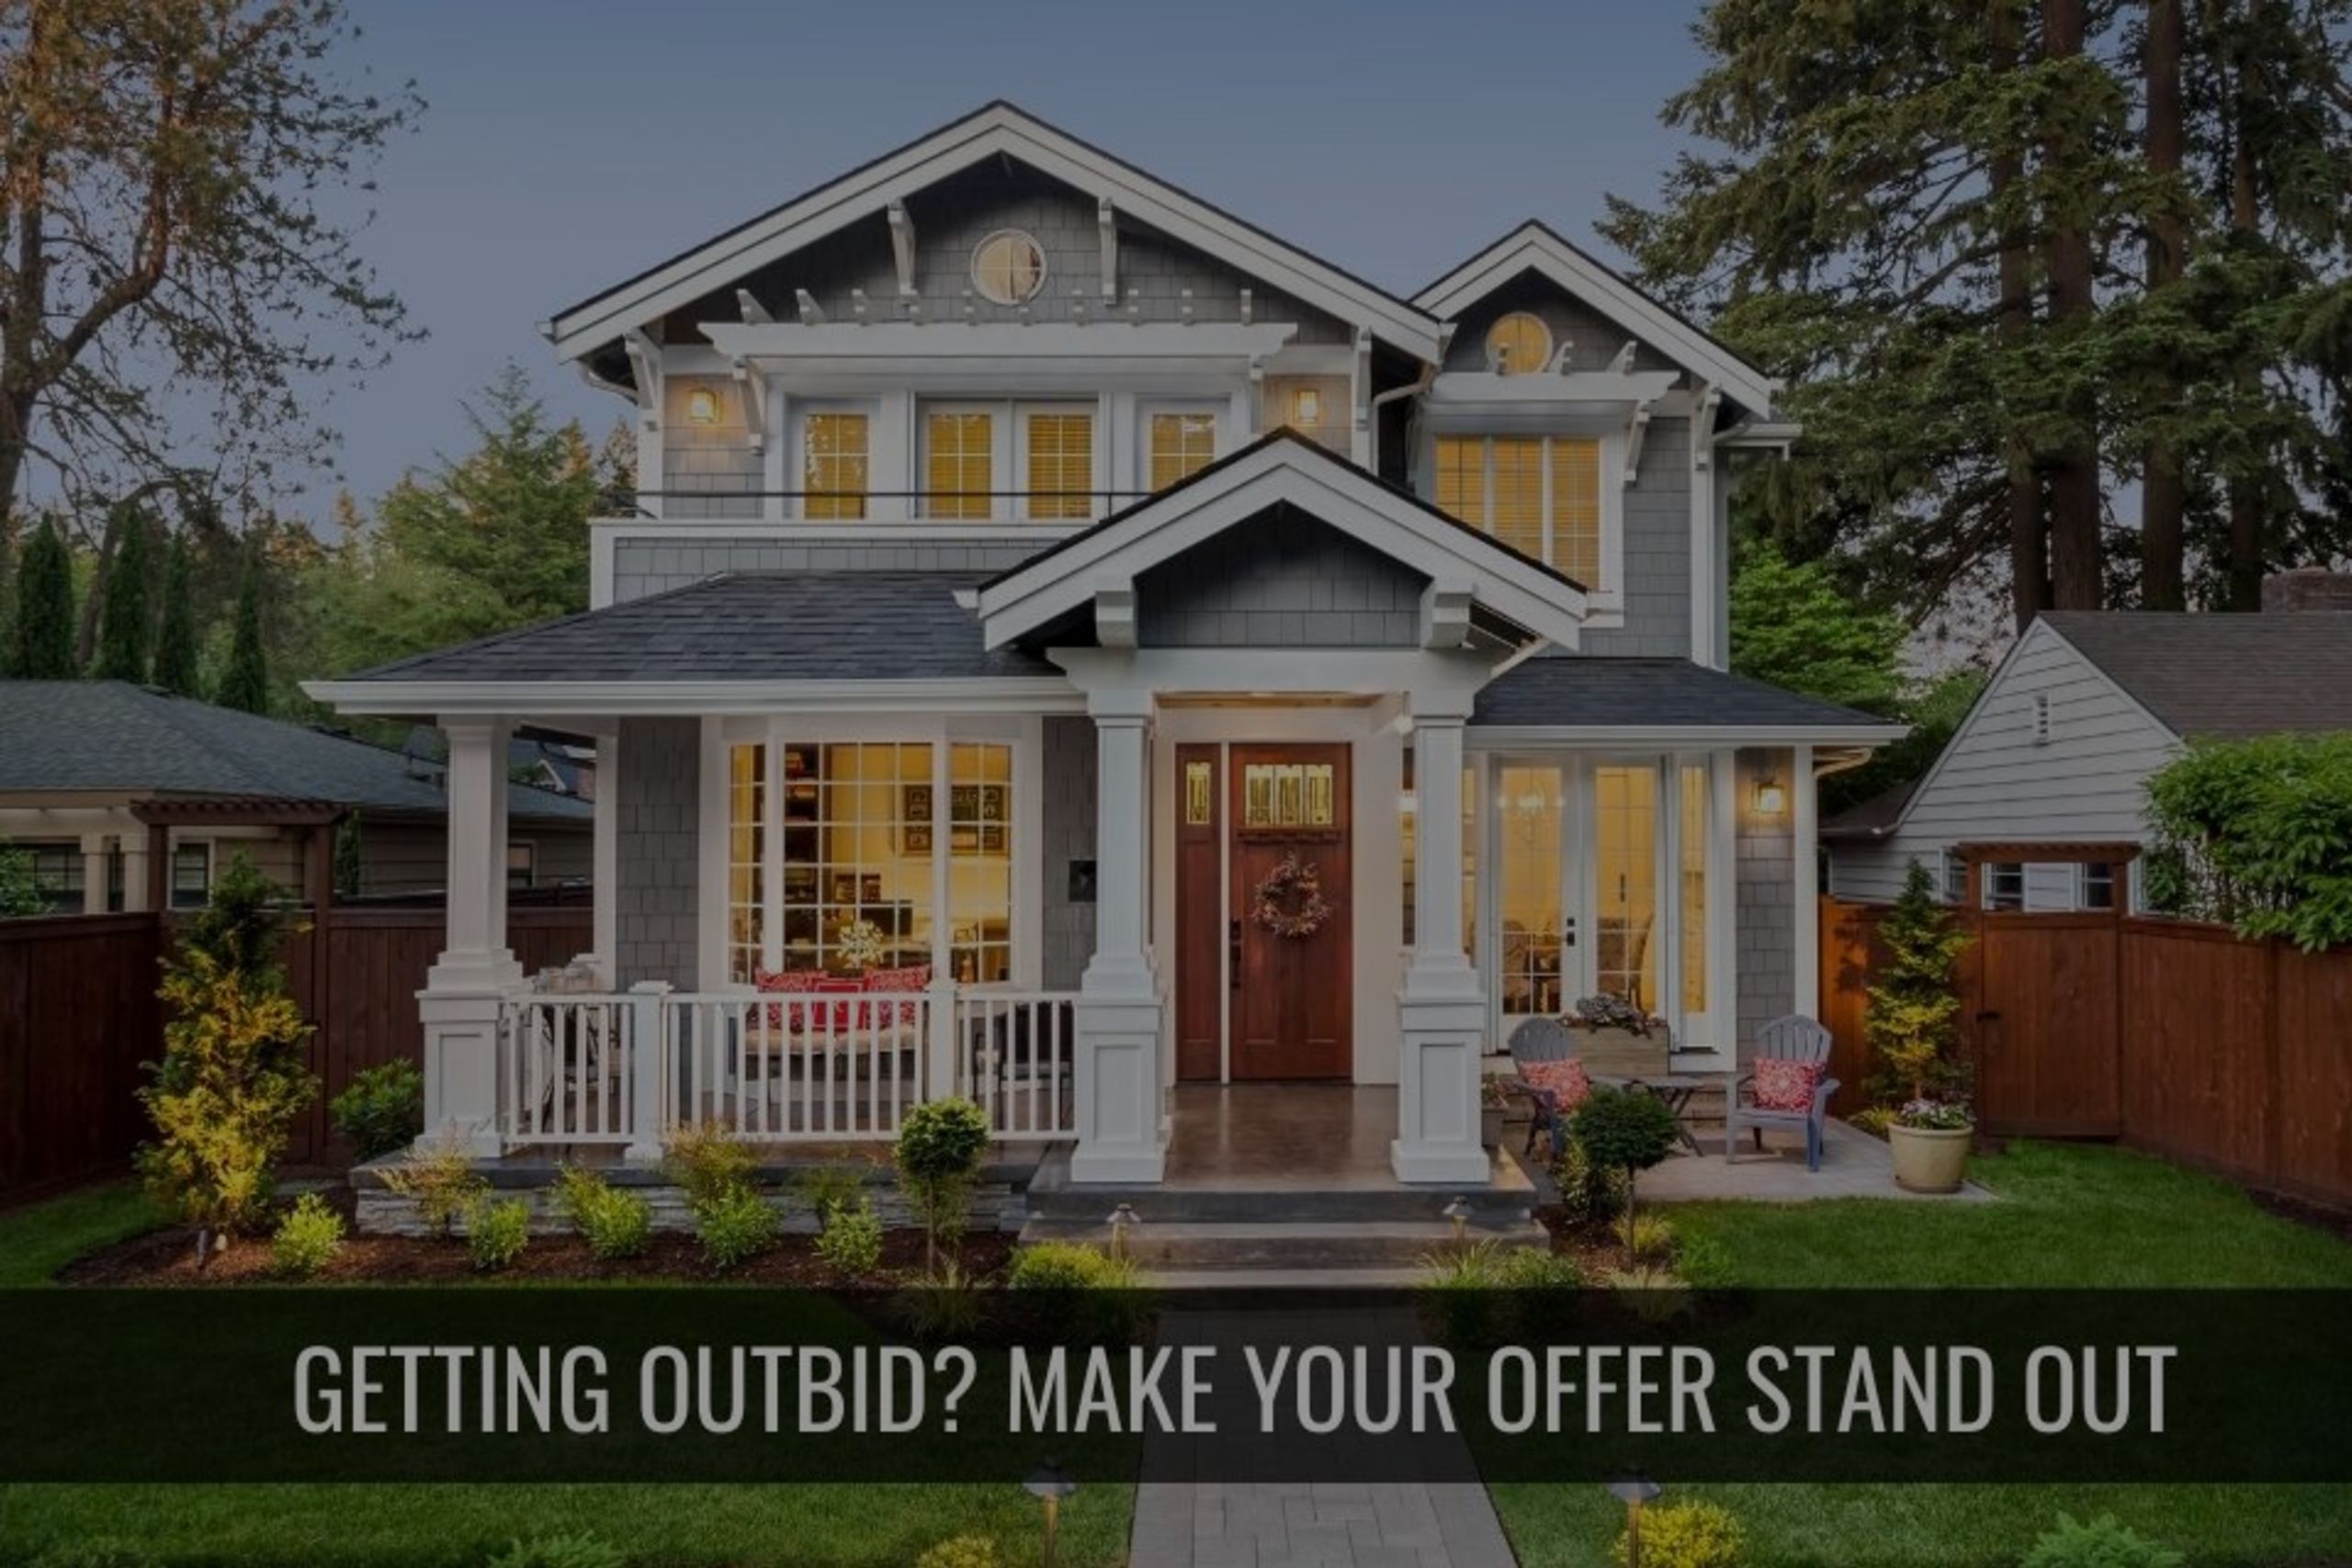 Getting Outbid? Strategies to Make Your Offer Stand Out and Get Accepted